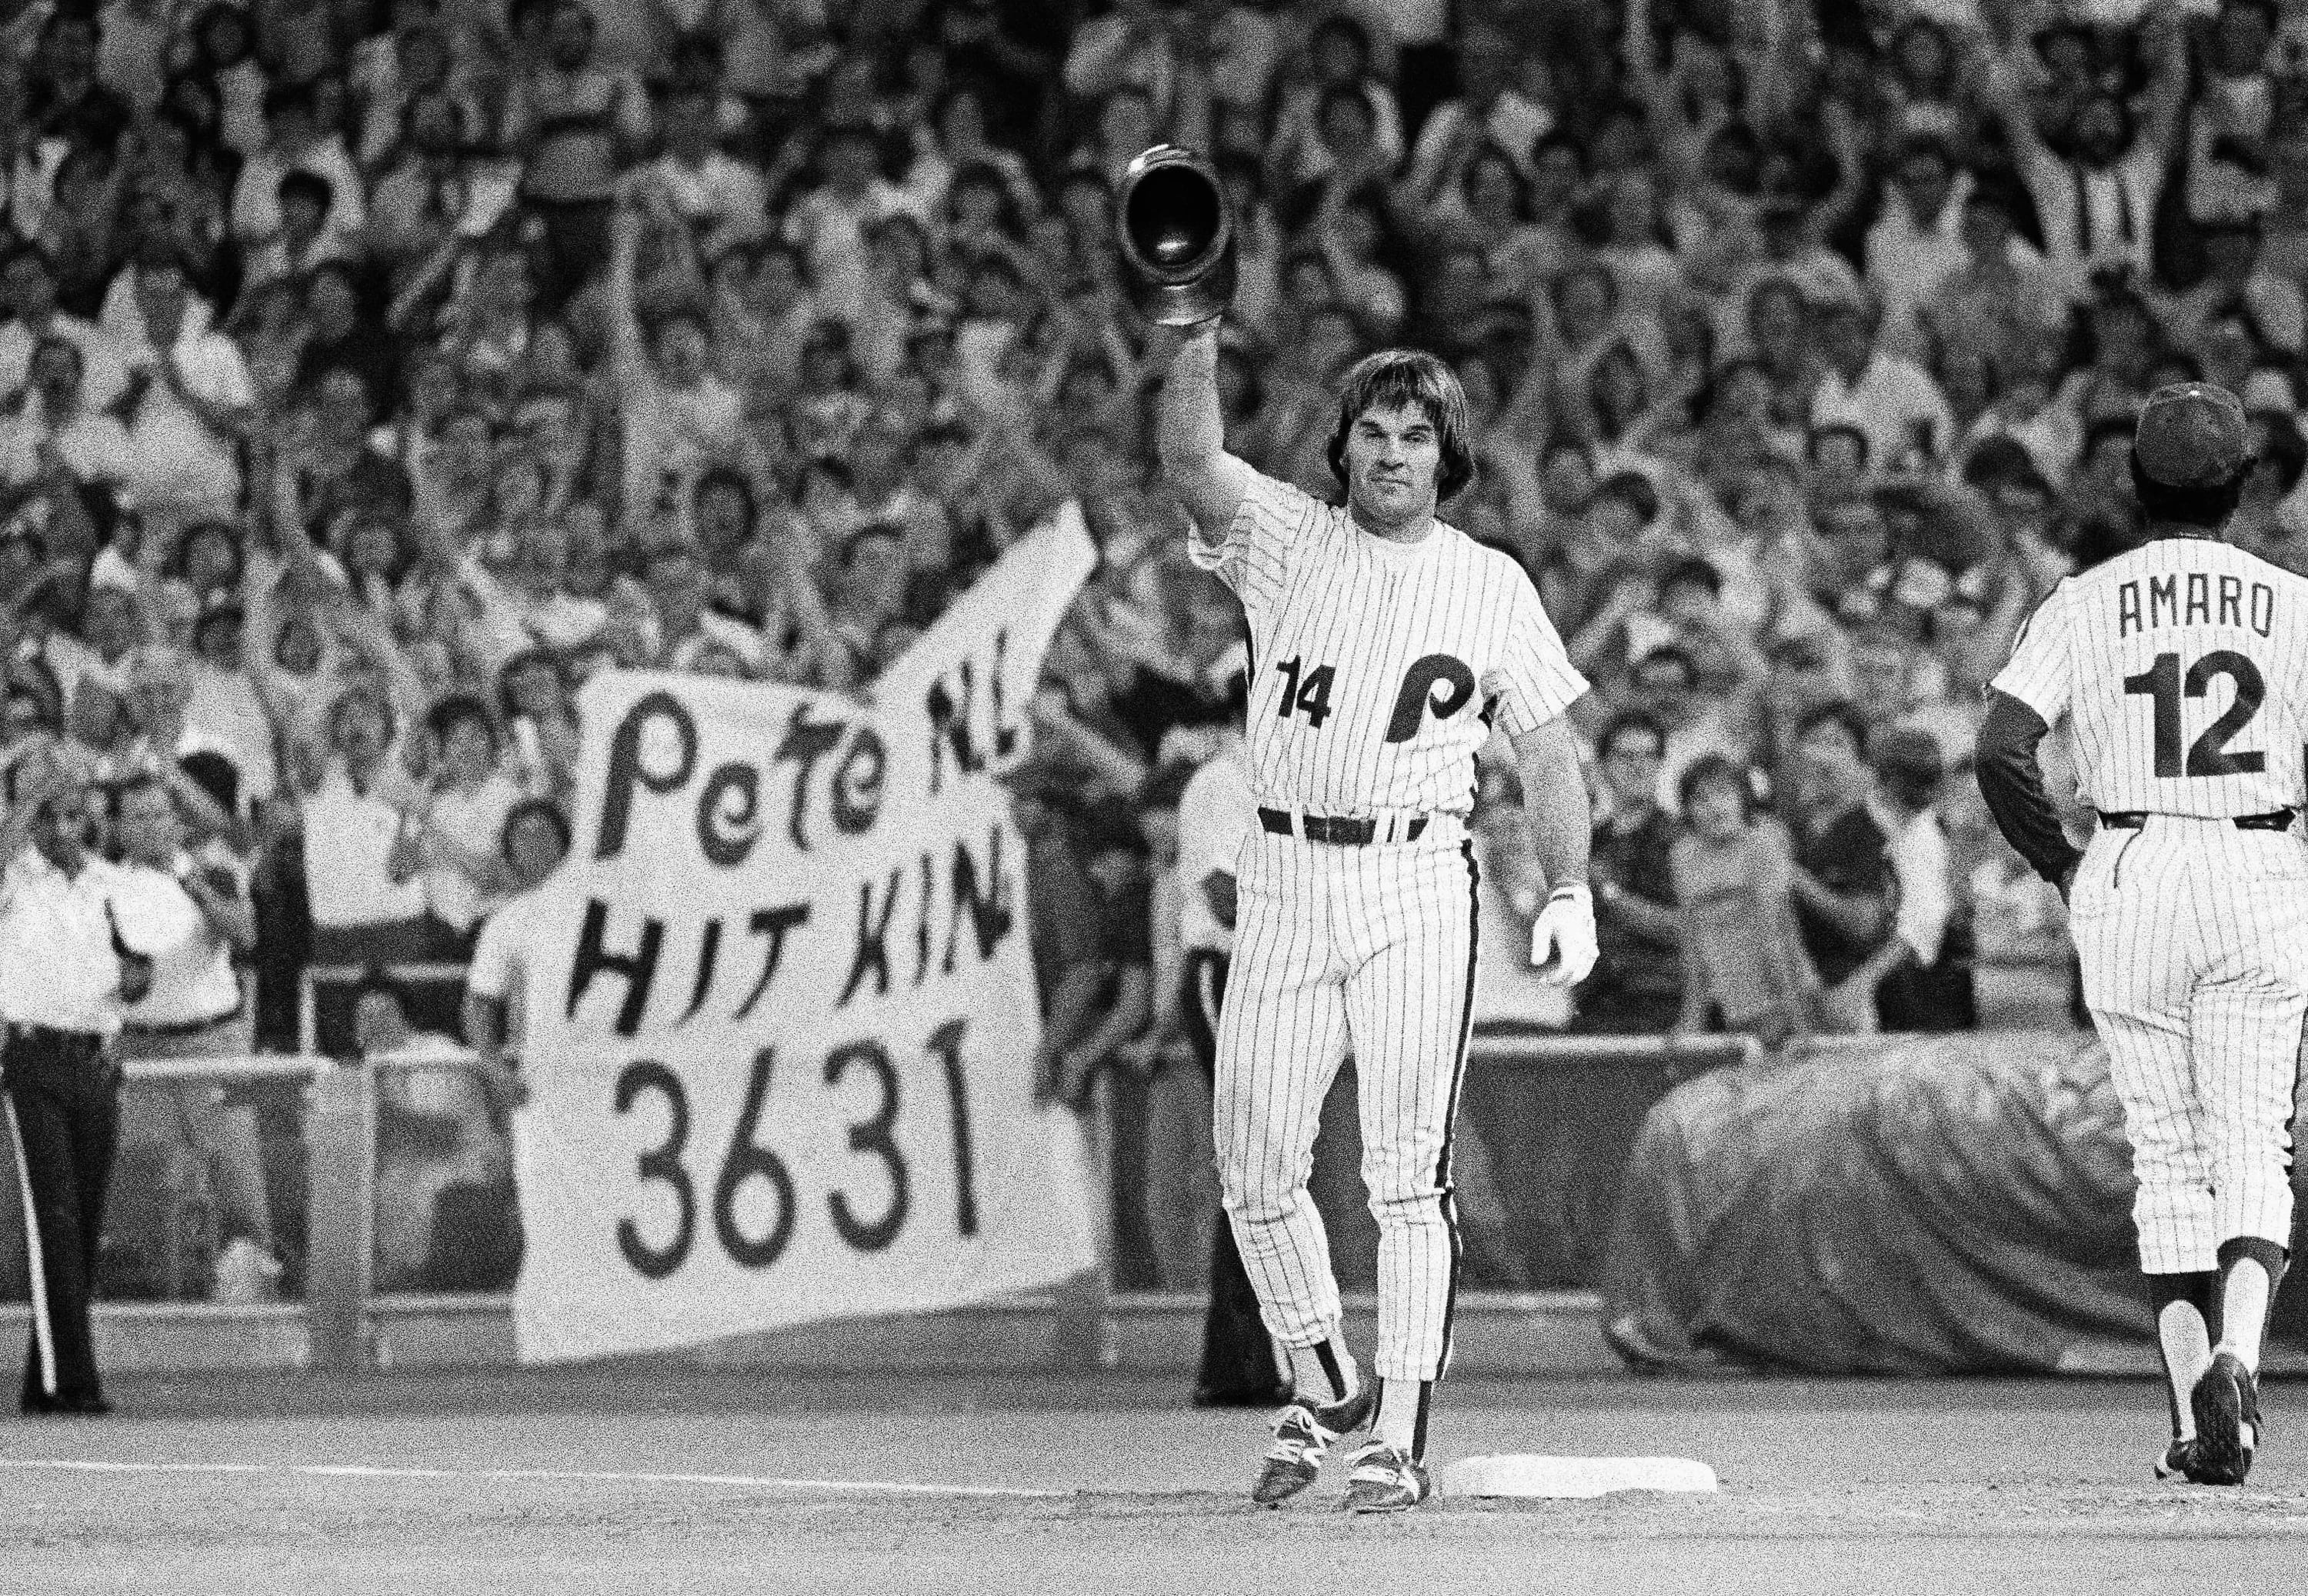 City working to save historic park where Pete Rose grew up playing baseball